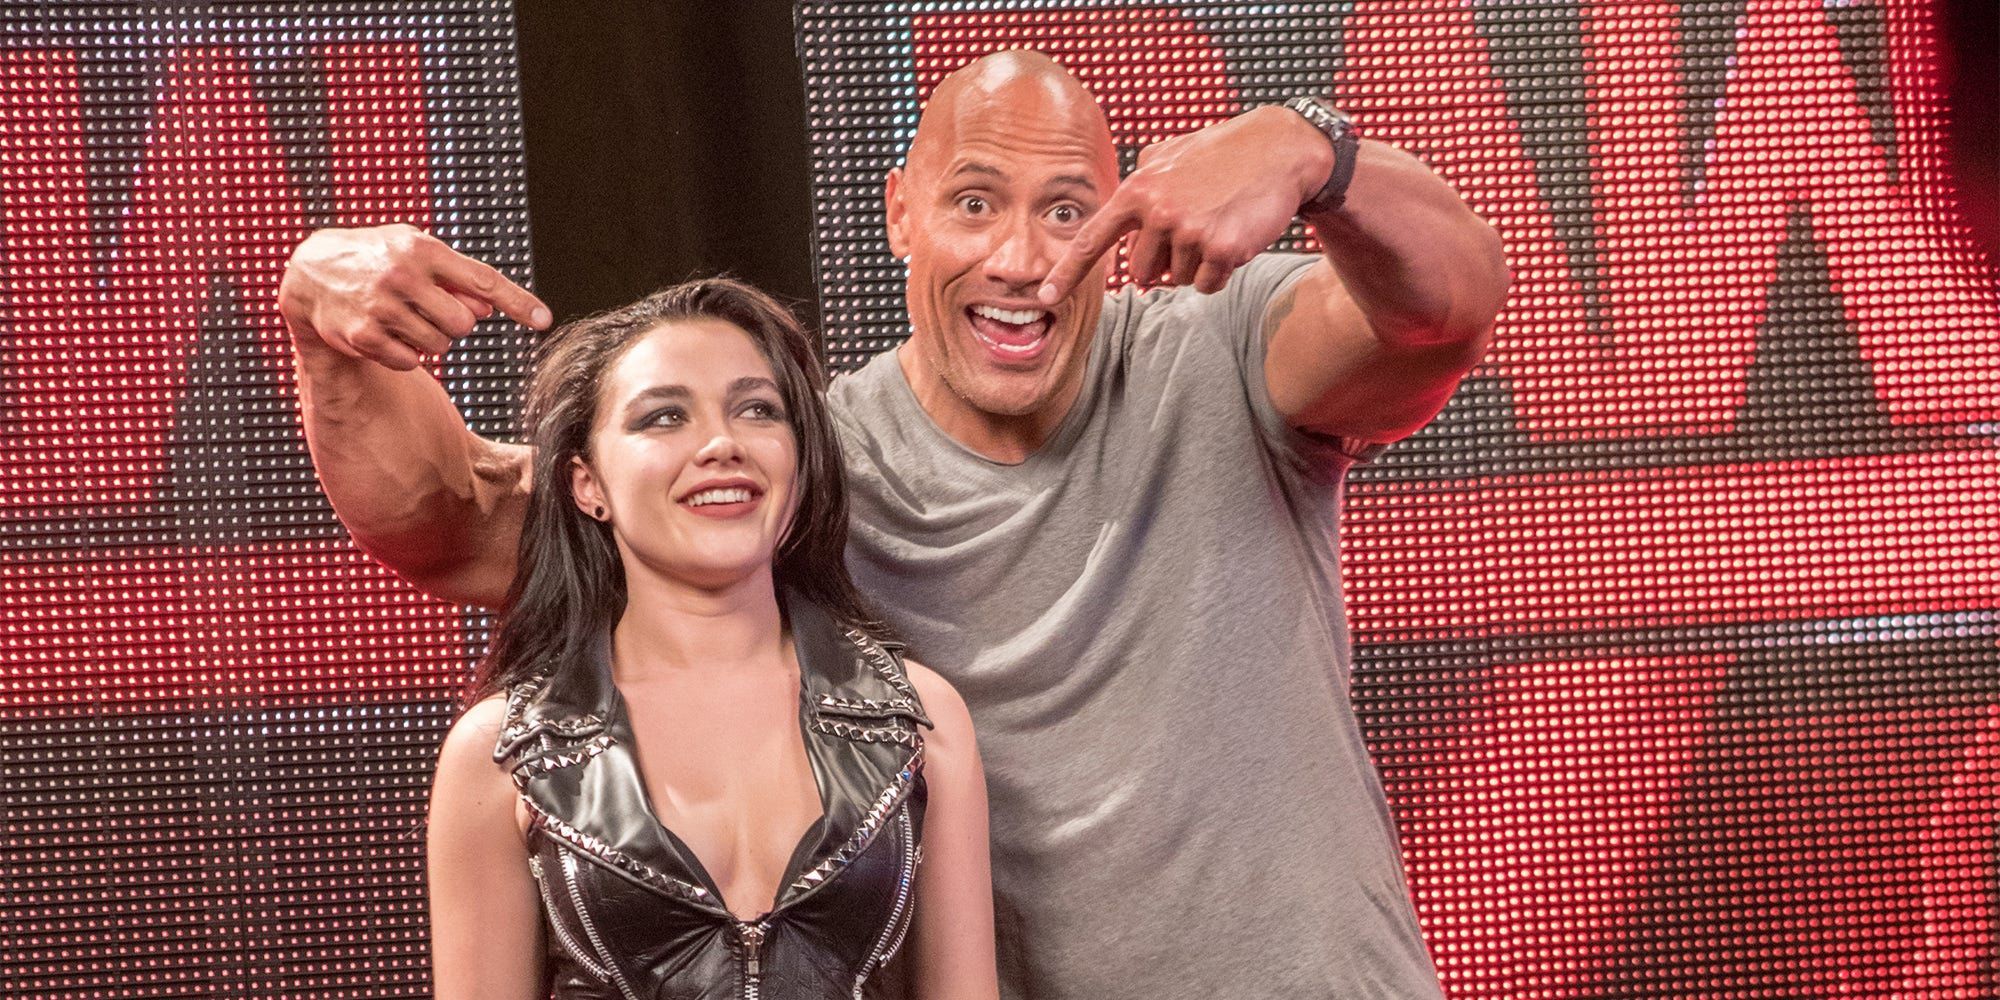 Florence Pugh as Paige and Dwayne Johnson as himself in Fighting With My Family (2019)